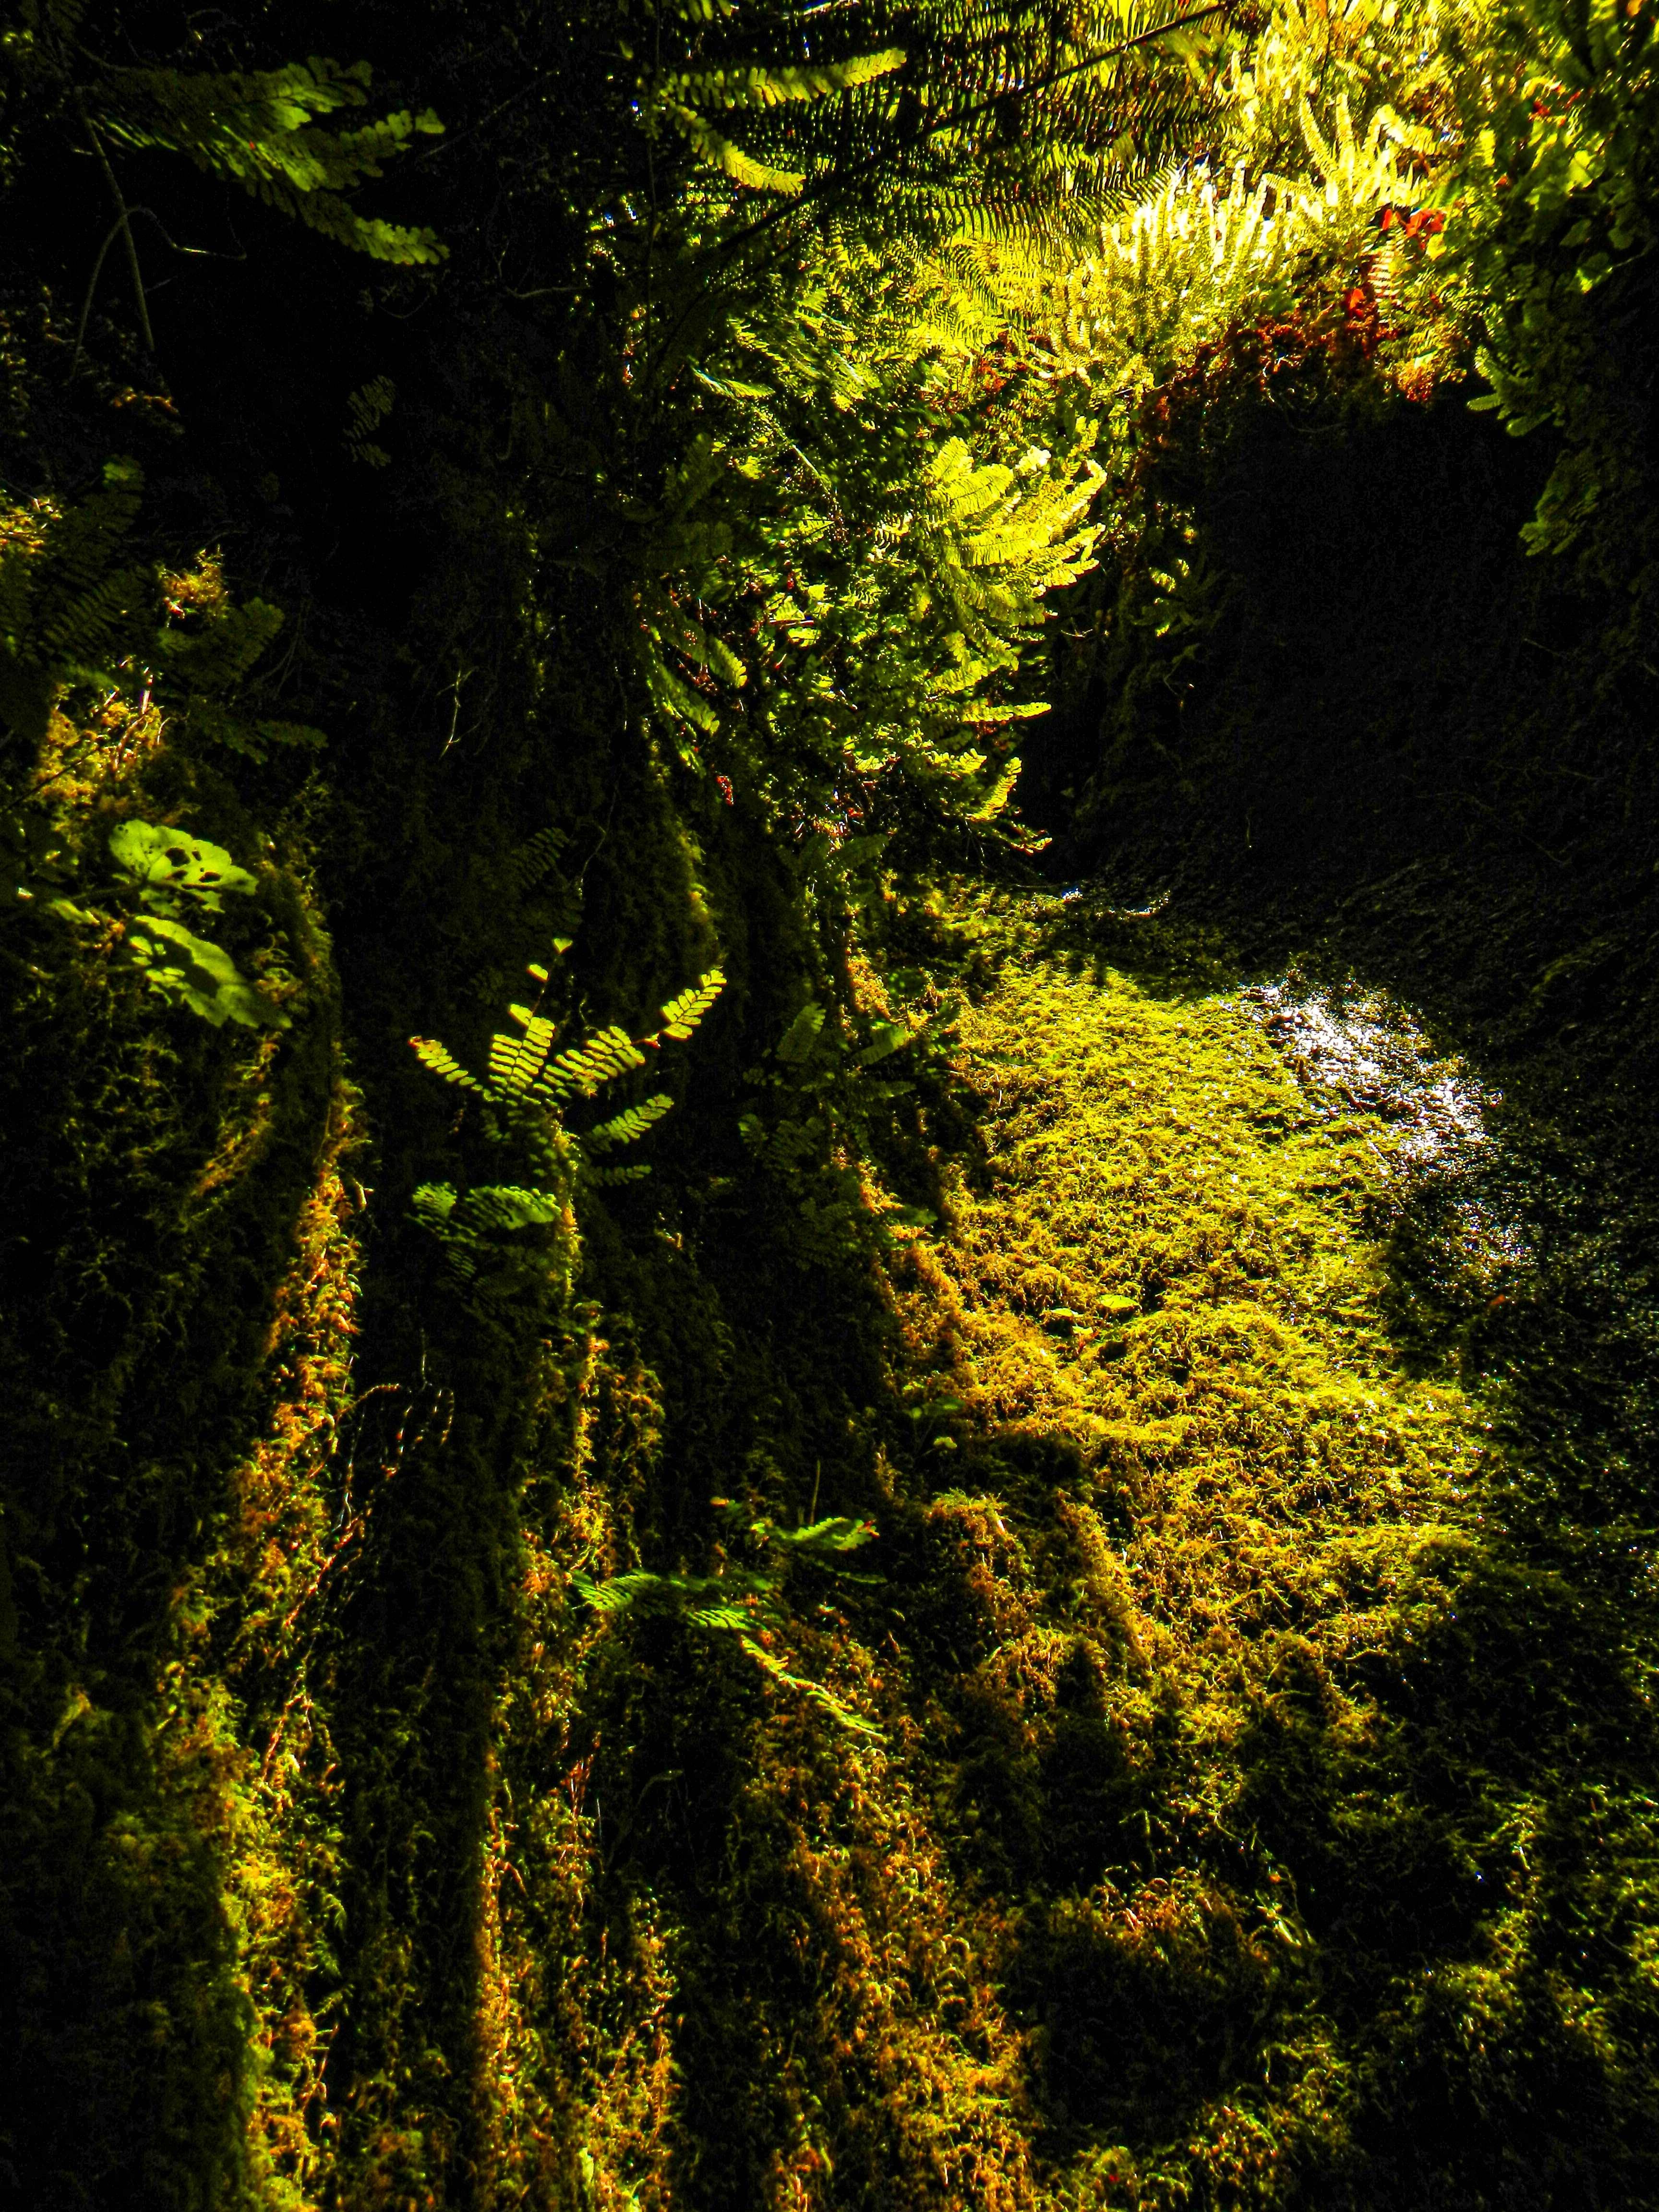 Ferns and moss growing up a steep slope with running water.